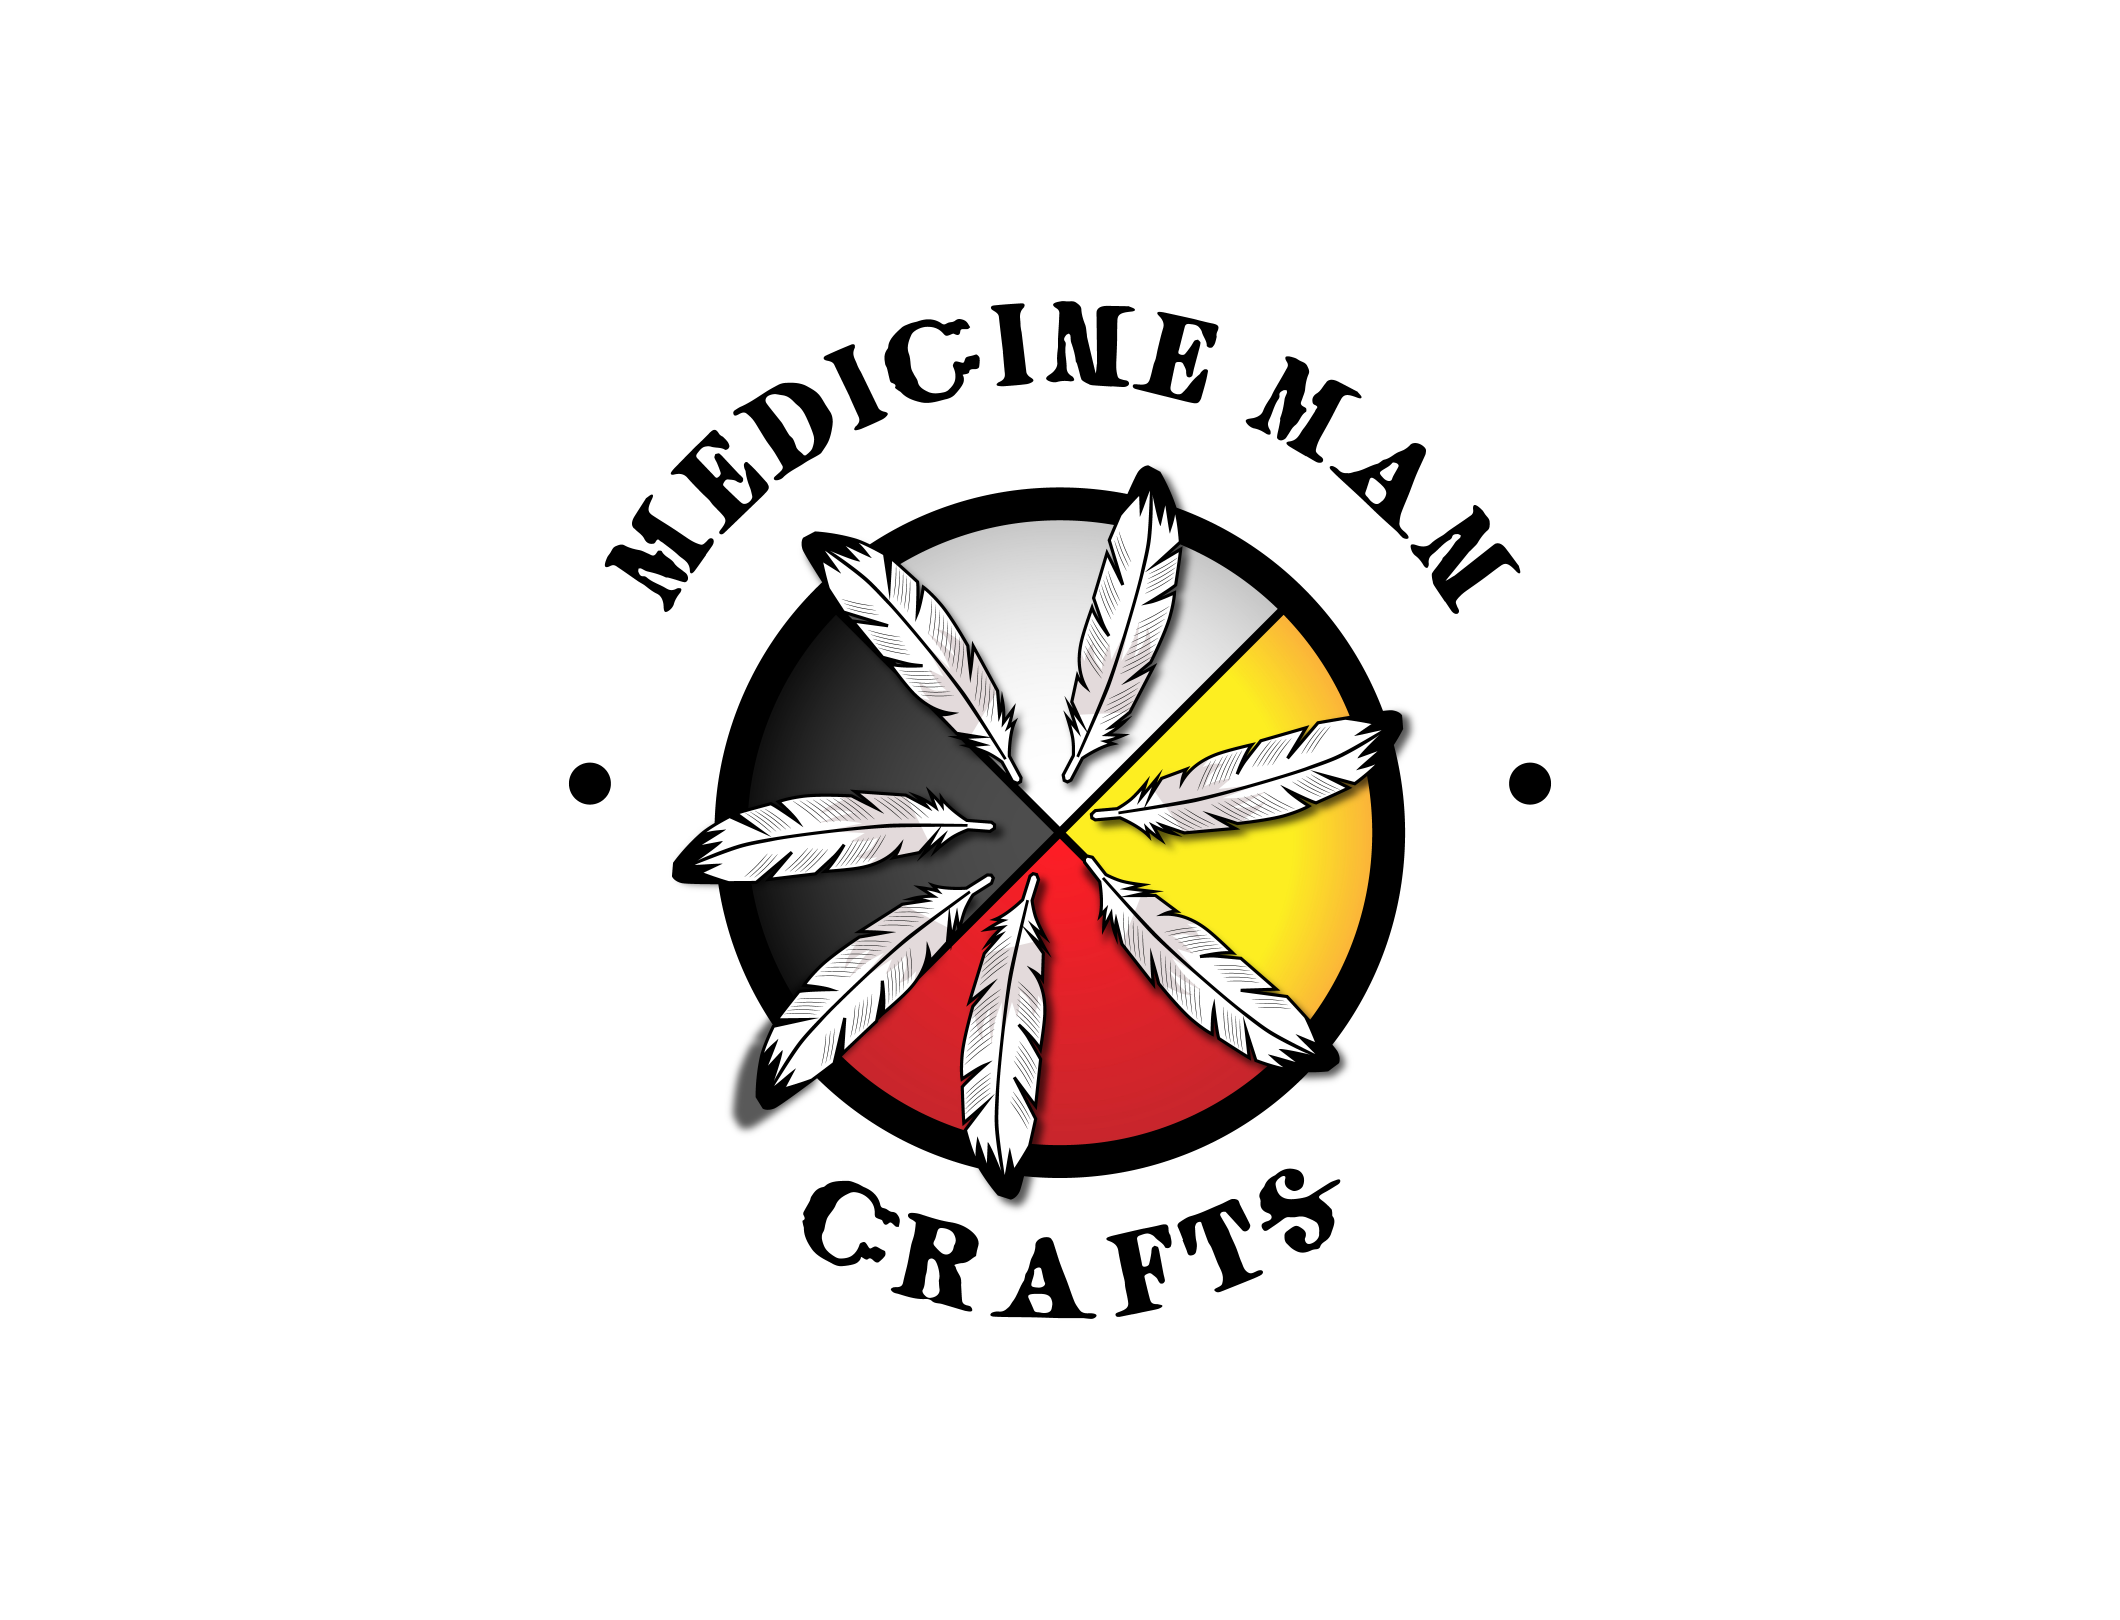 Authentic, Native, Locally Crafted - Medicine Man Crafts